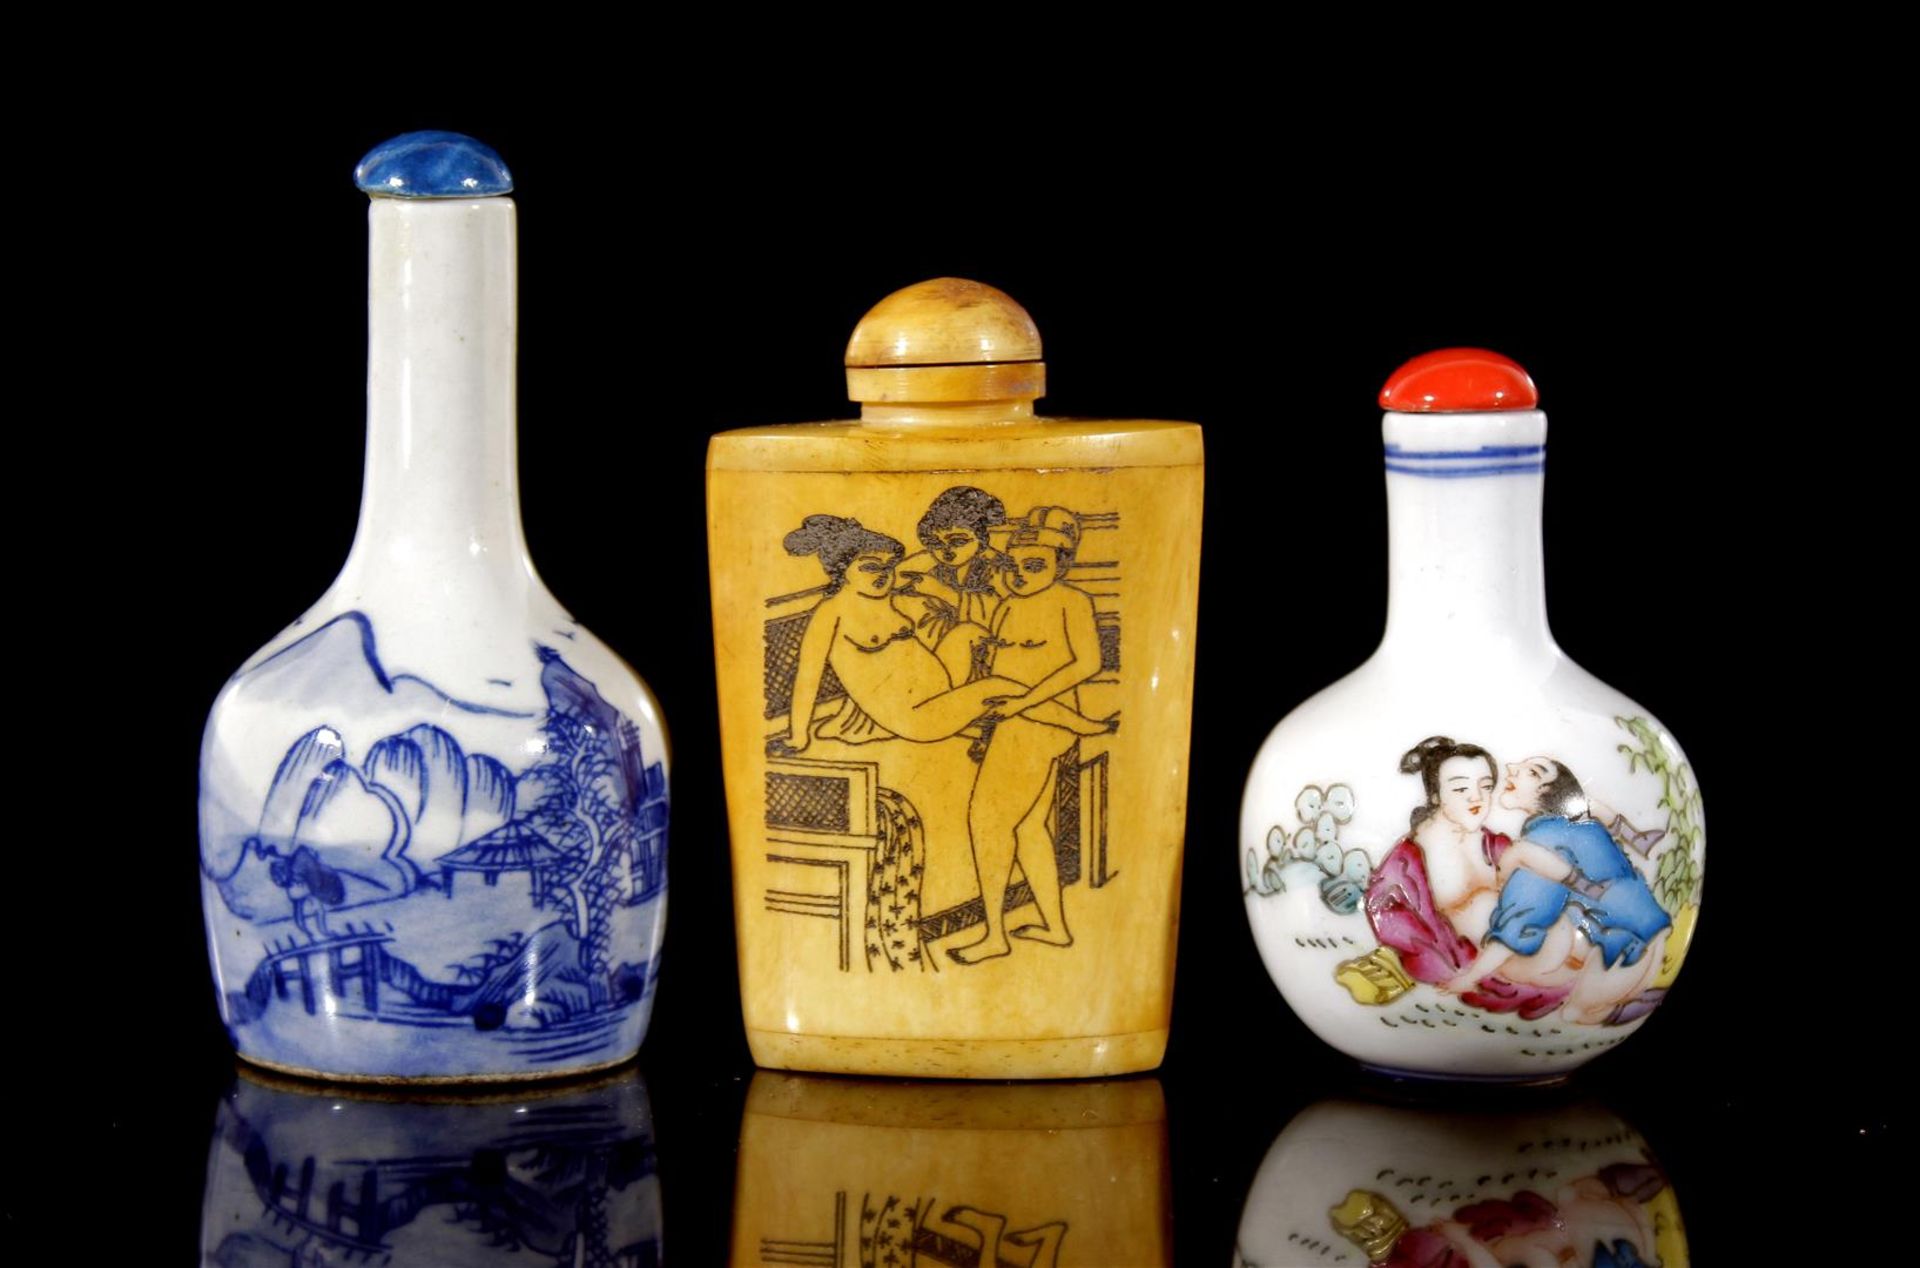 Chinese porcelain snuff bottle with blue decor 8.5 cm high, porcelain snuff bottle with erotic decor